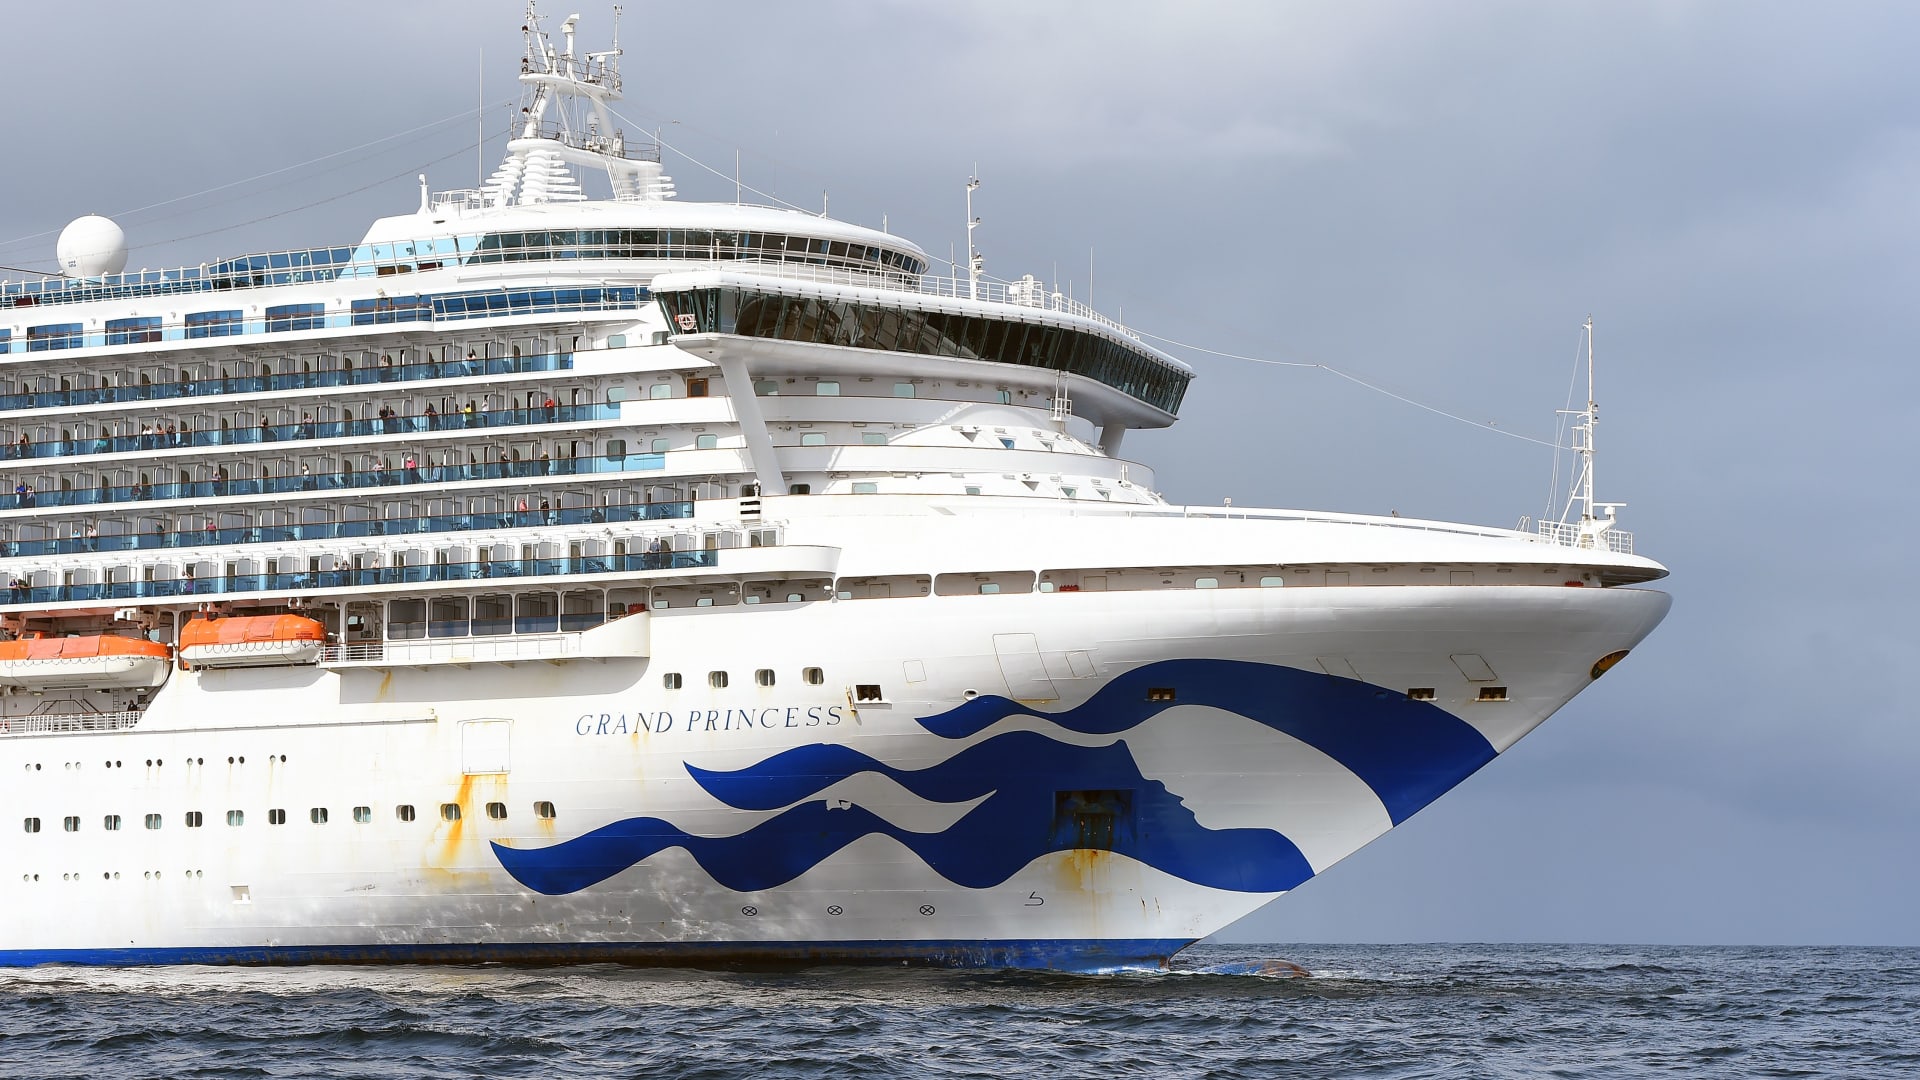 Carnival’s Princess Cruises will return to Japan in March 2023 after nearly three-year hiatus